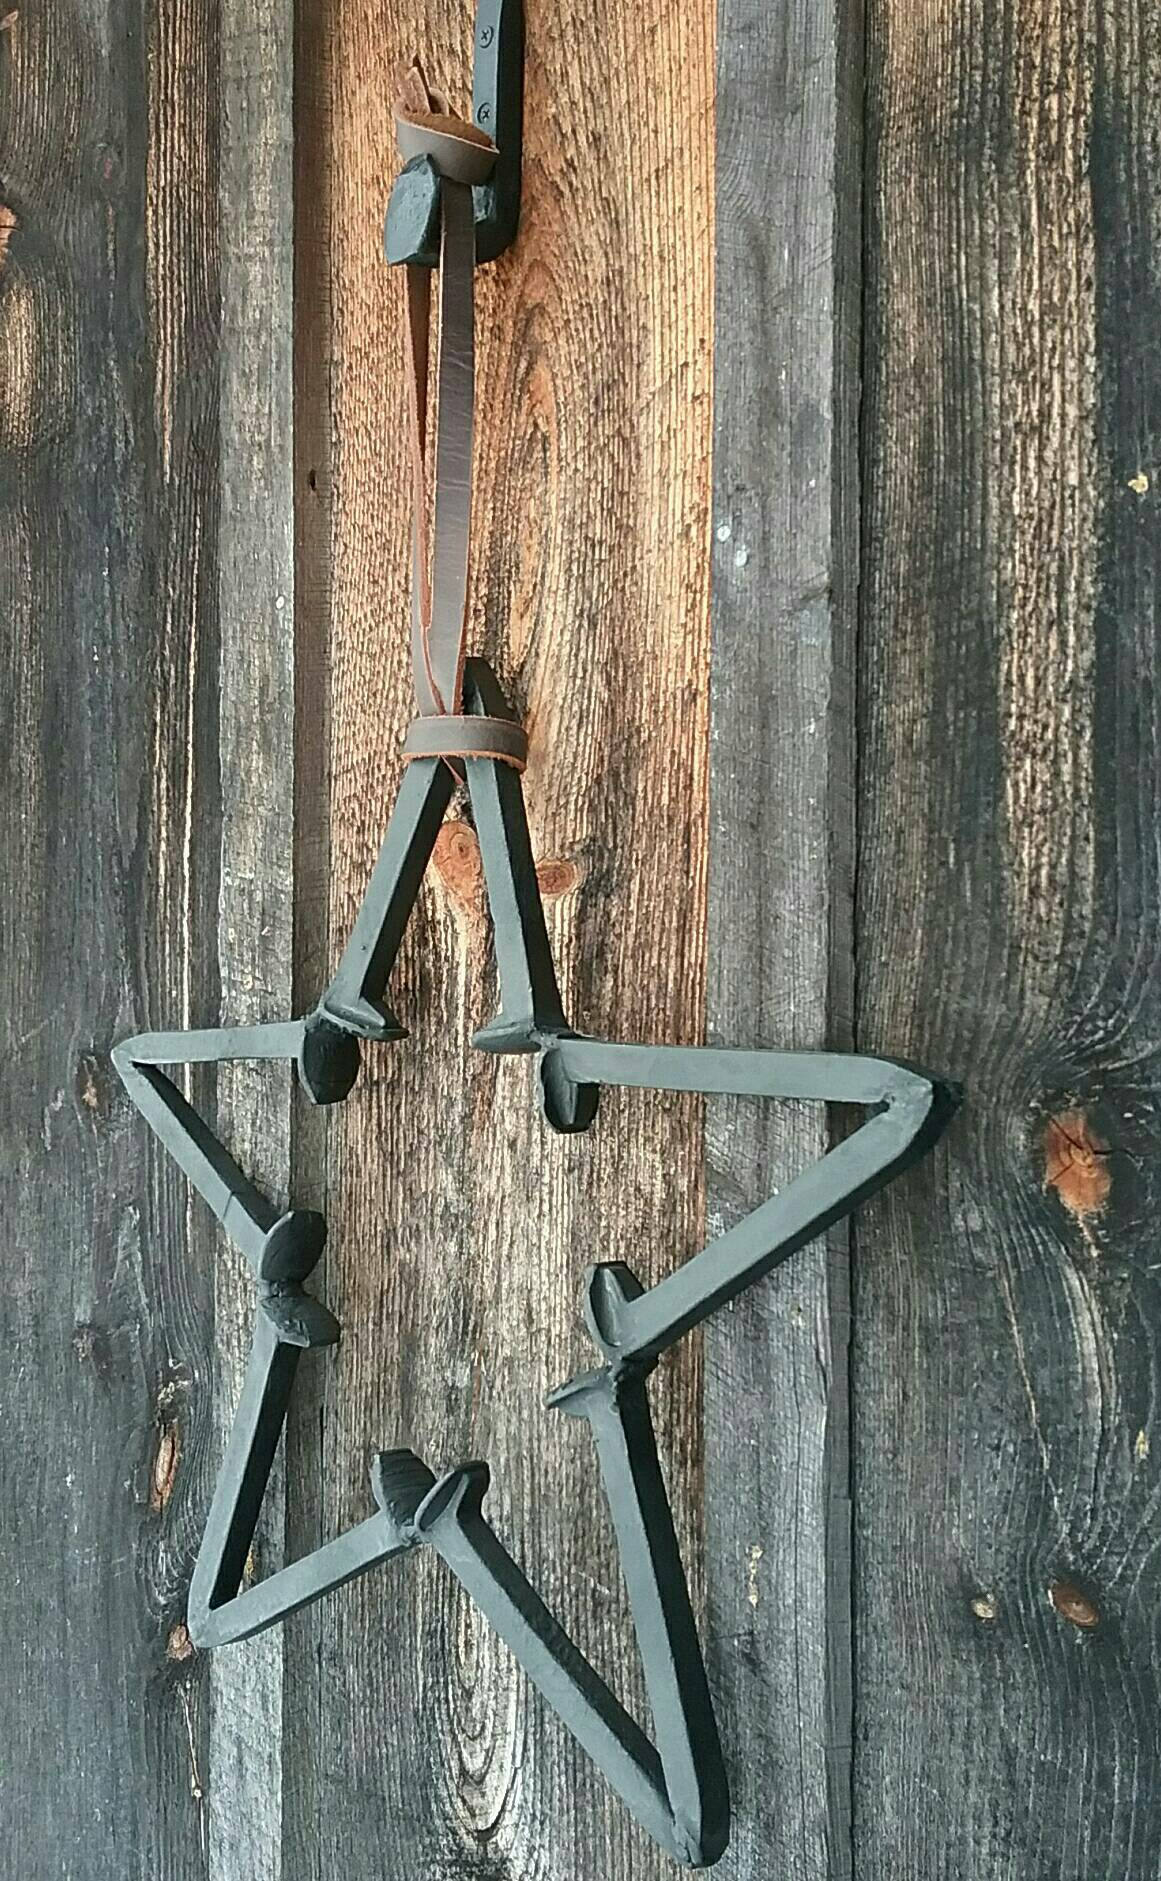 Rustic Repurposed Railroad Spike Barn Star. Three Piece Set Includes Railroad Spike Hook and Amish Harness Leather Strap